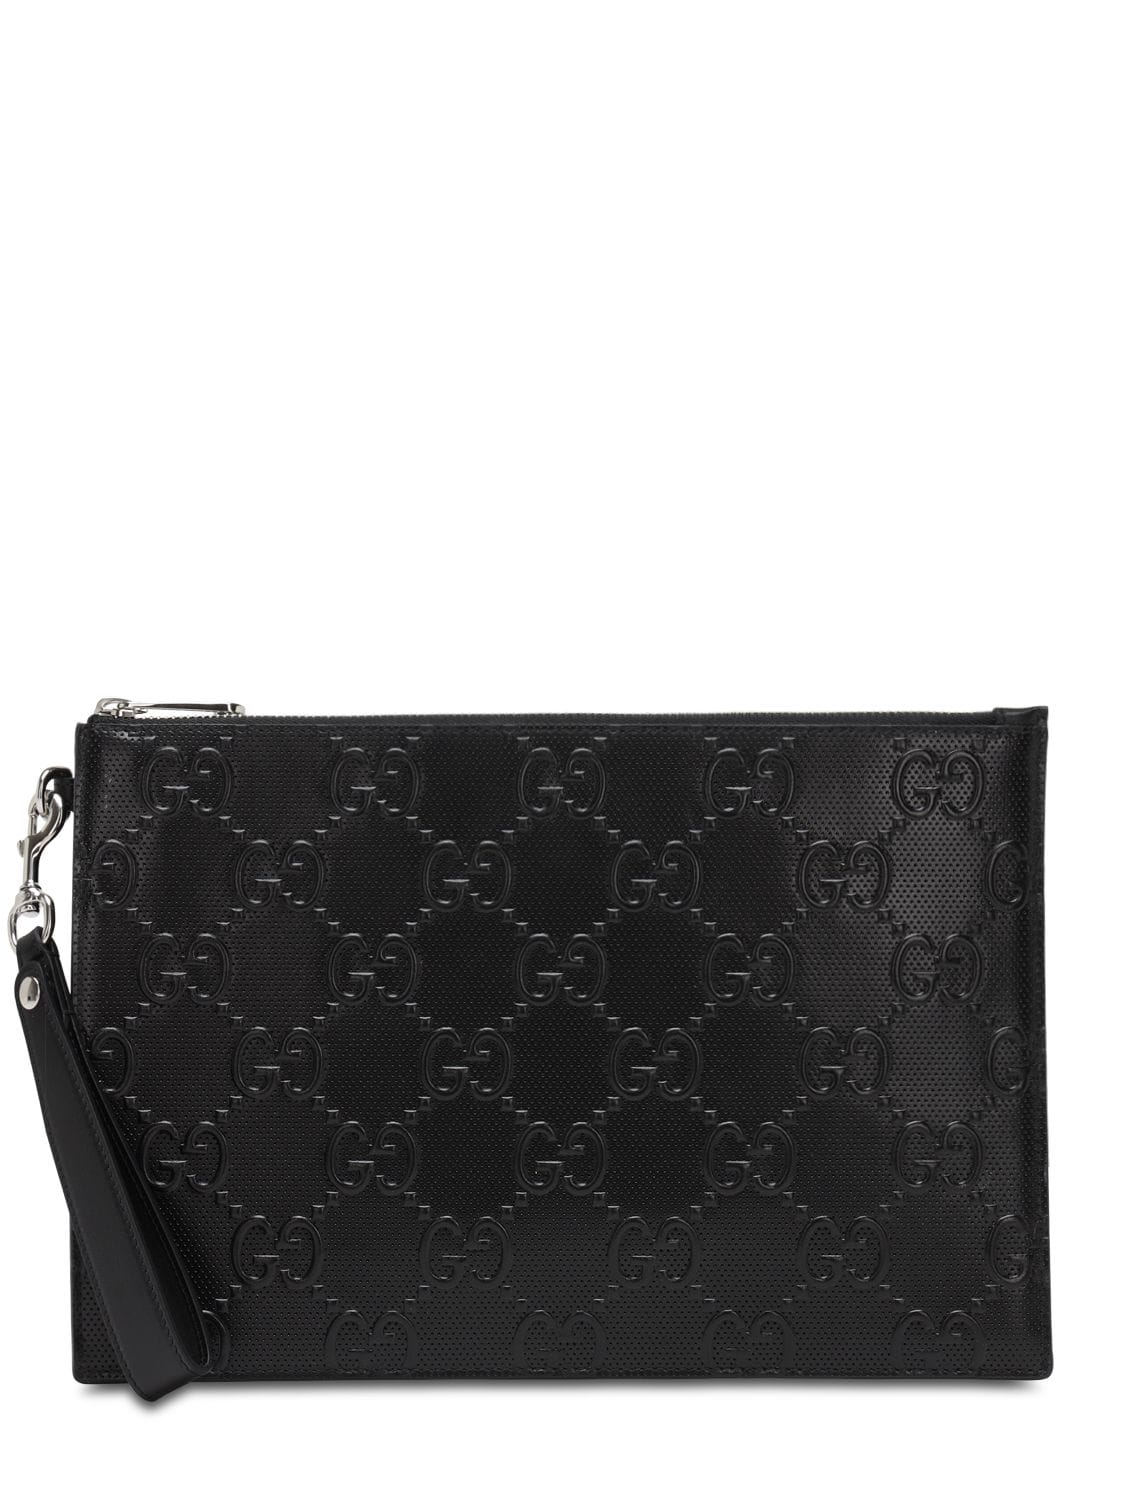 Gucci Gg Embossed Leather Pouch In Black